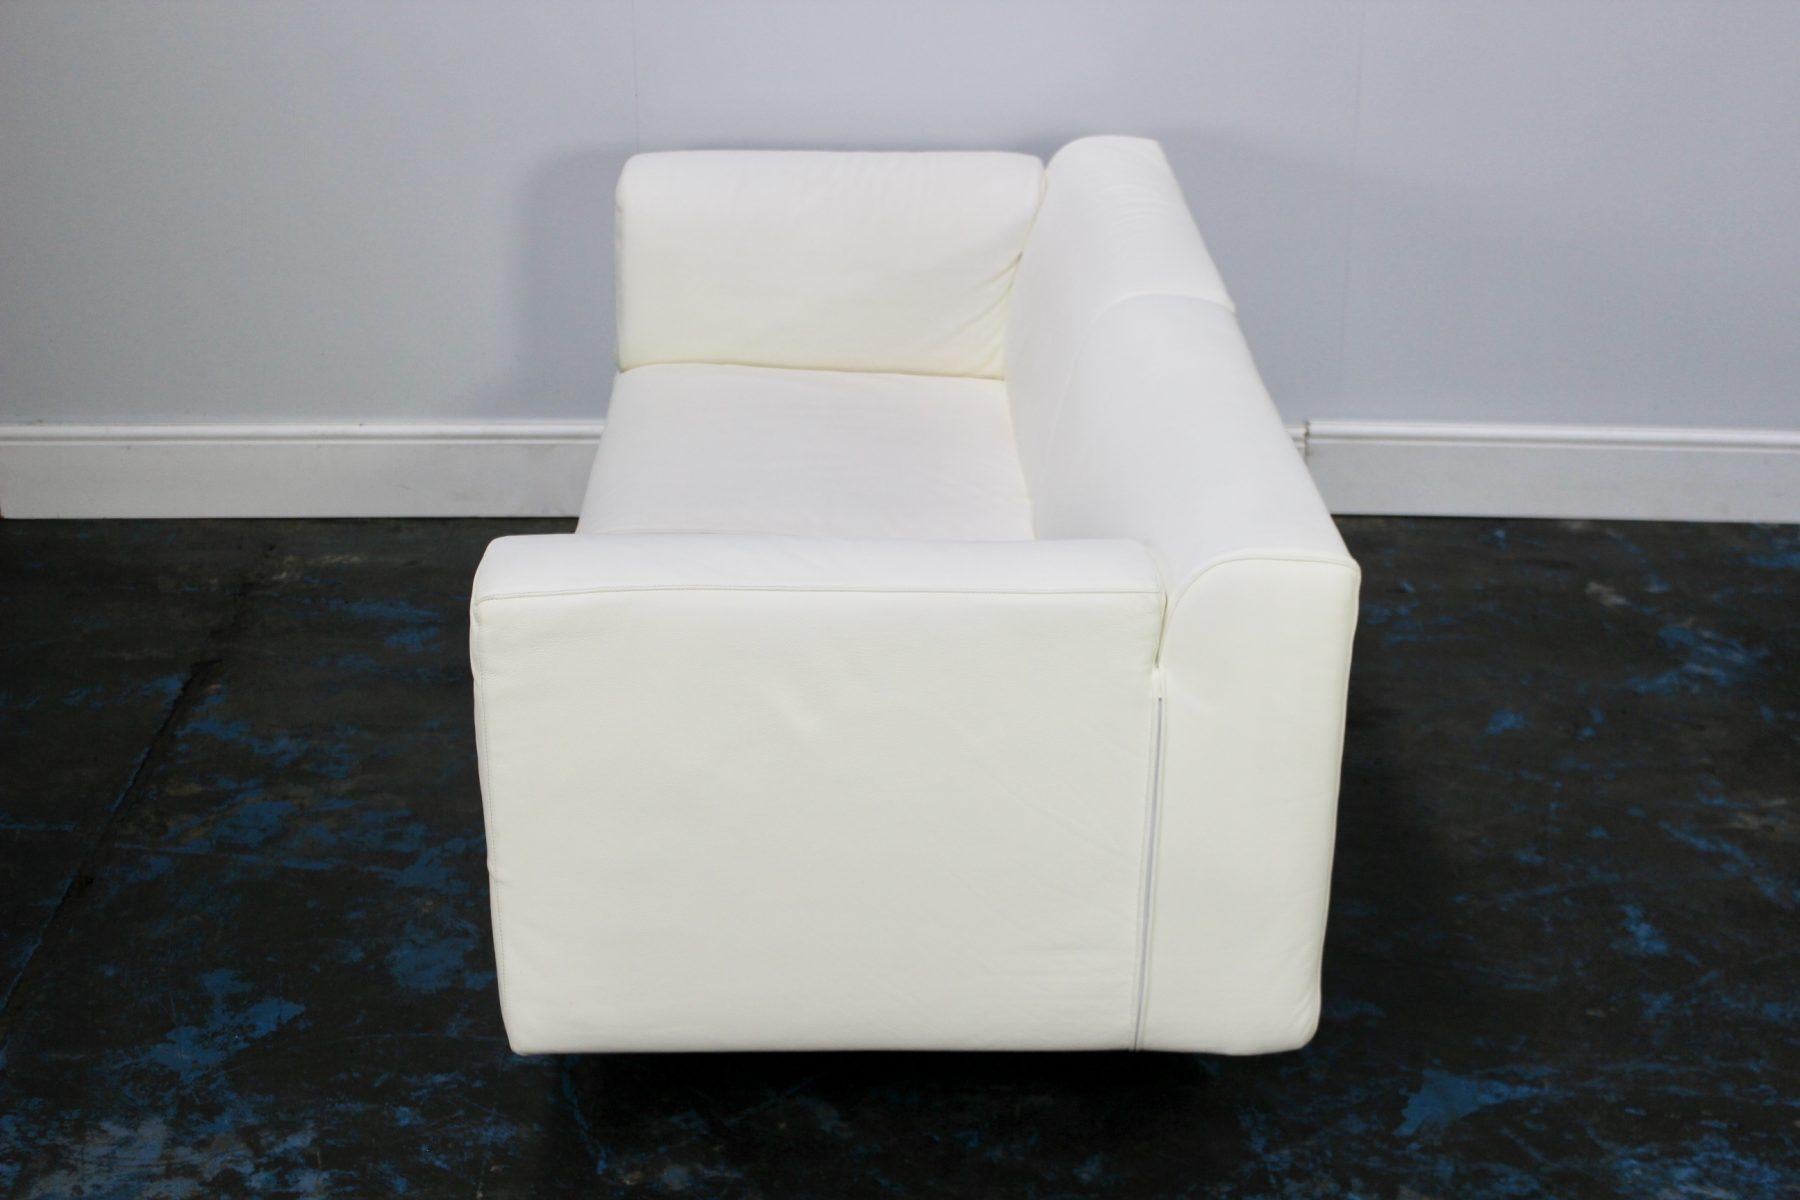 Cassina “250 Met” Large 2-Seat Sofa in Chalk White Leather For Sale 7